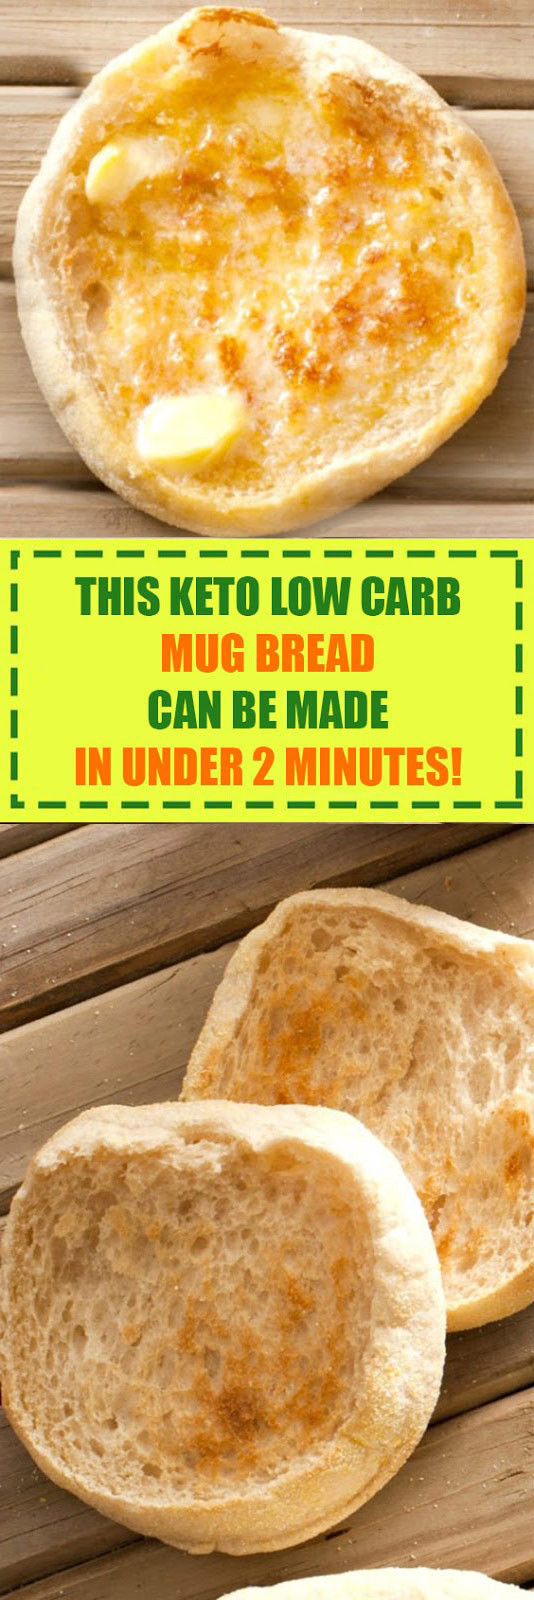 Low Carb Bread In A Mug
 This Keto Low Carb Mug Bread Can Be Made in Under 2